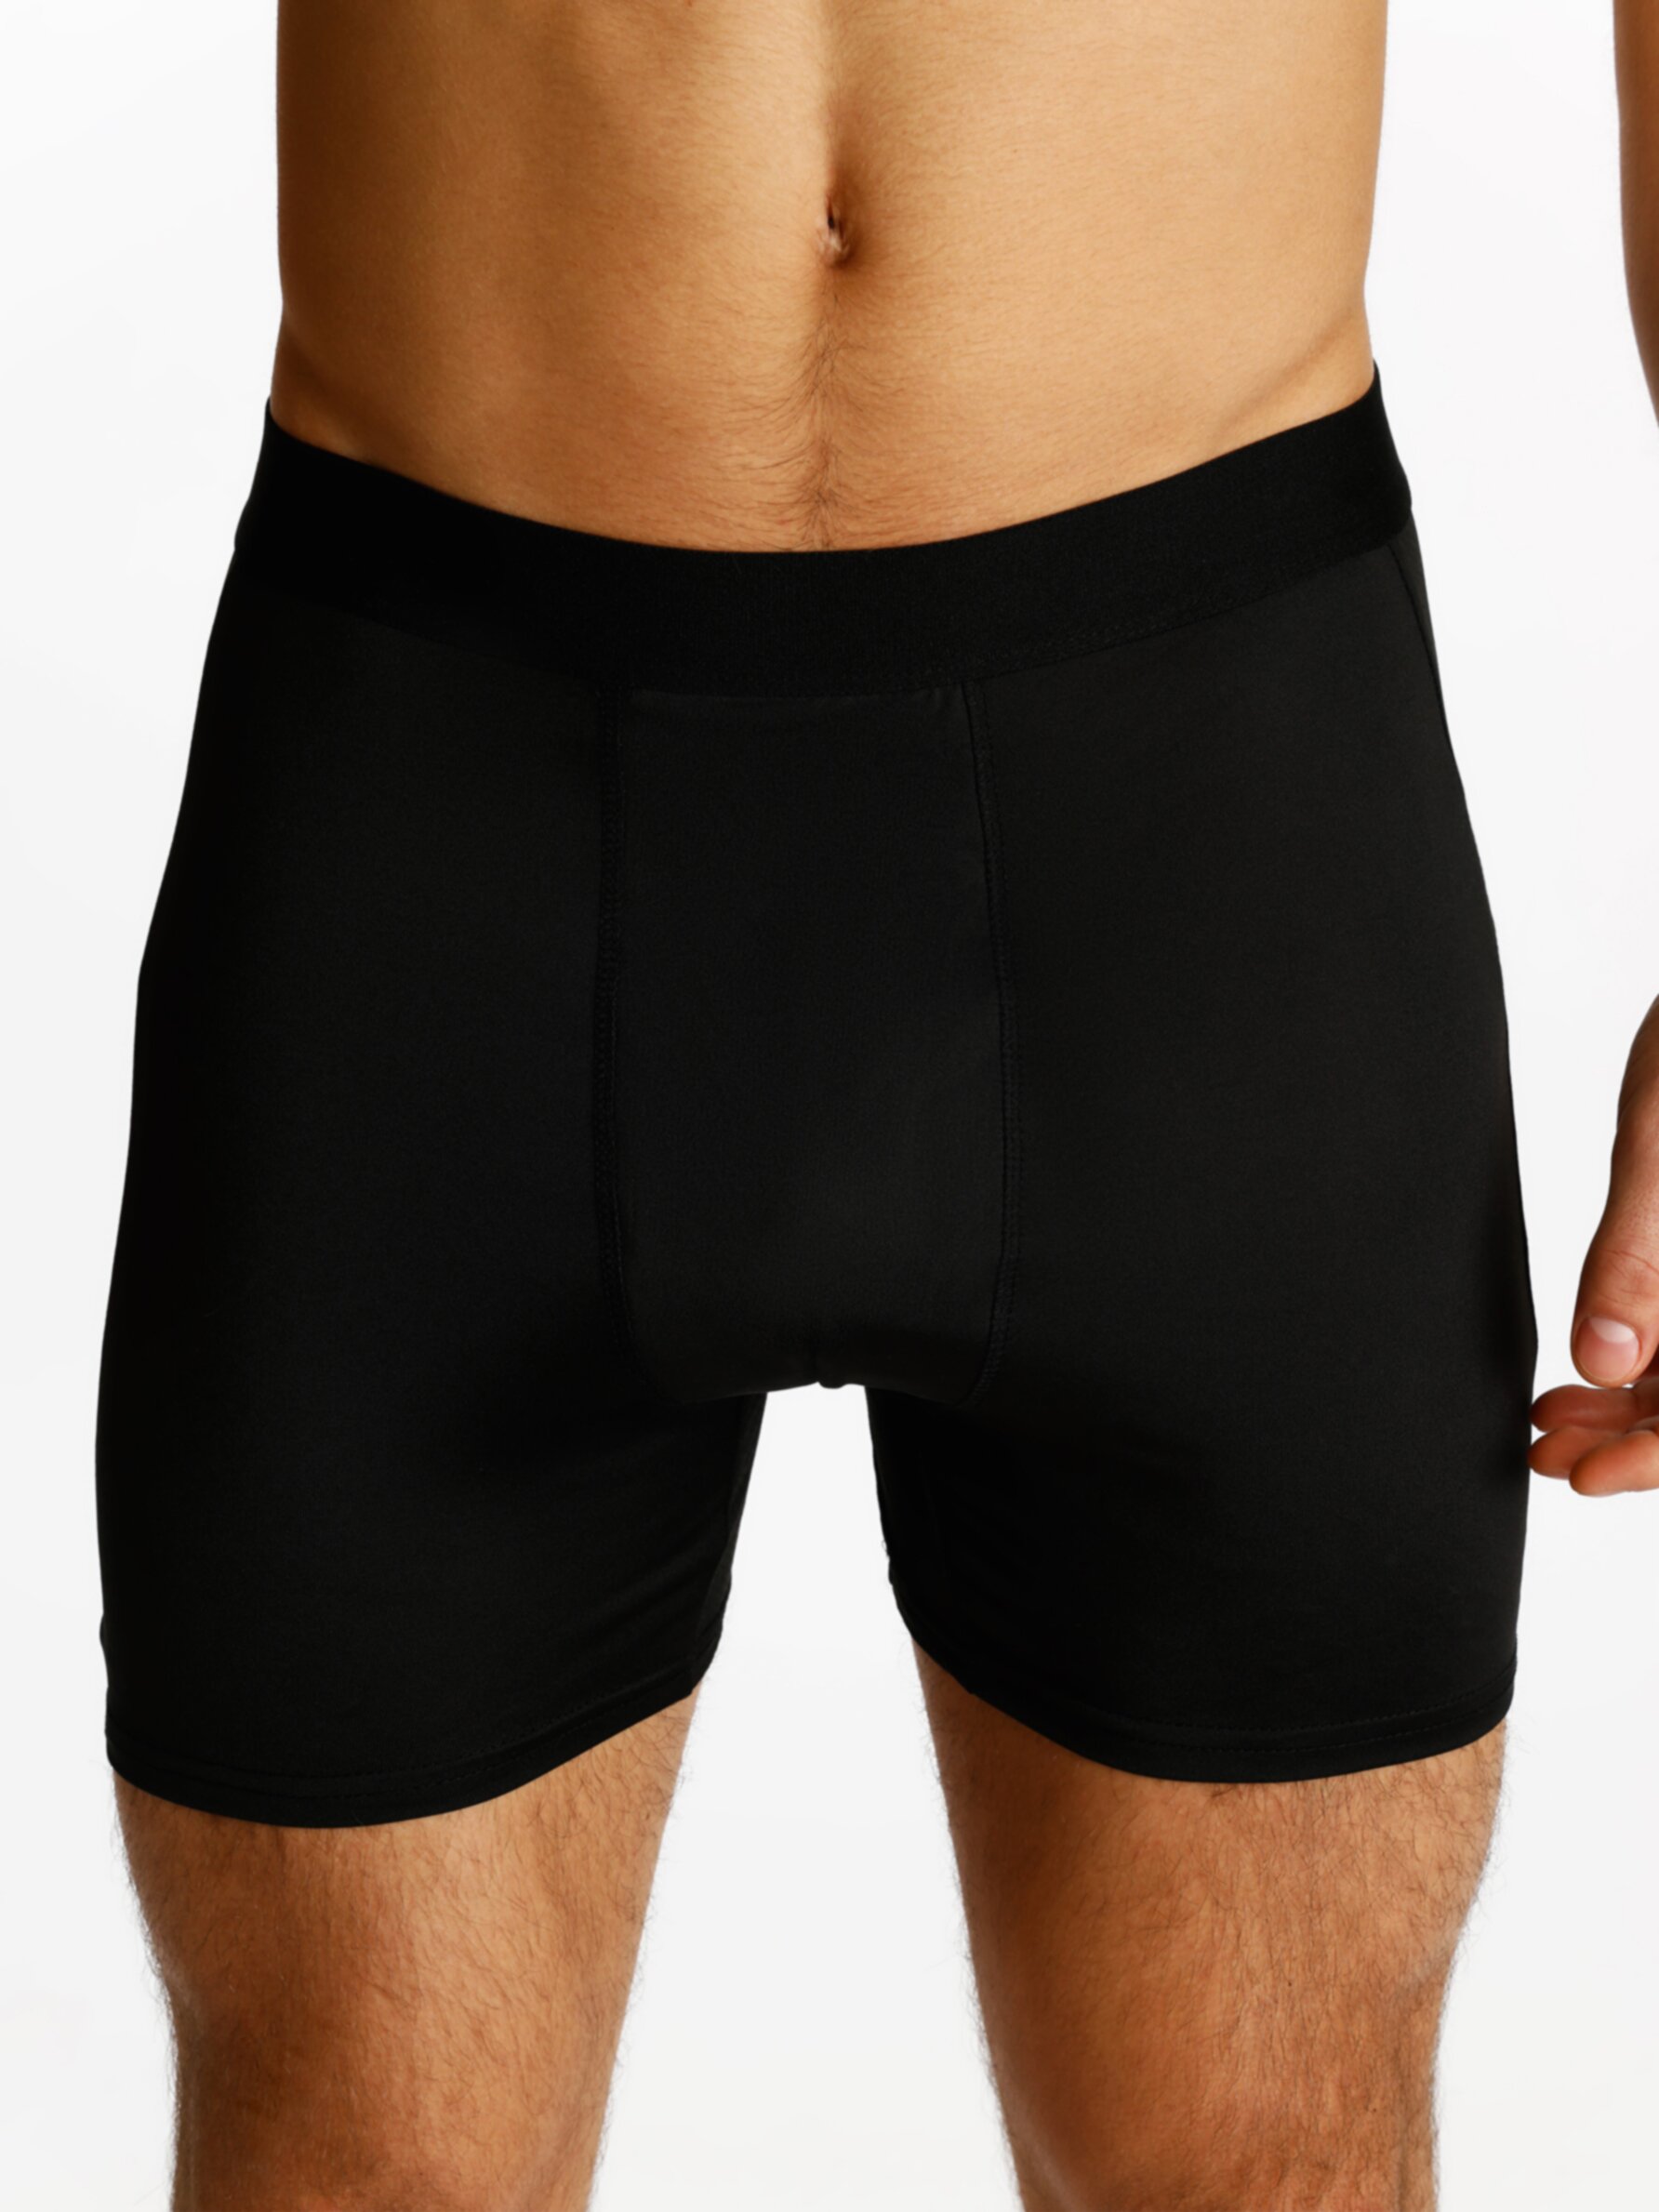 Pack of 2 pairs of sports boxers. - Boxers - CLOTHING - Man